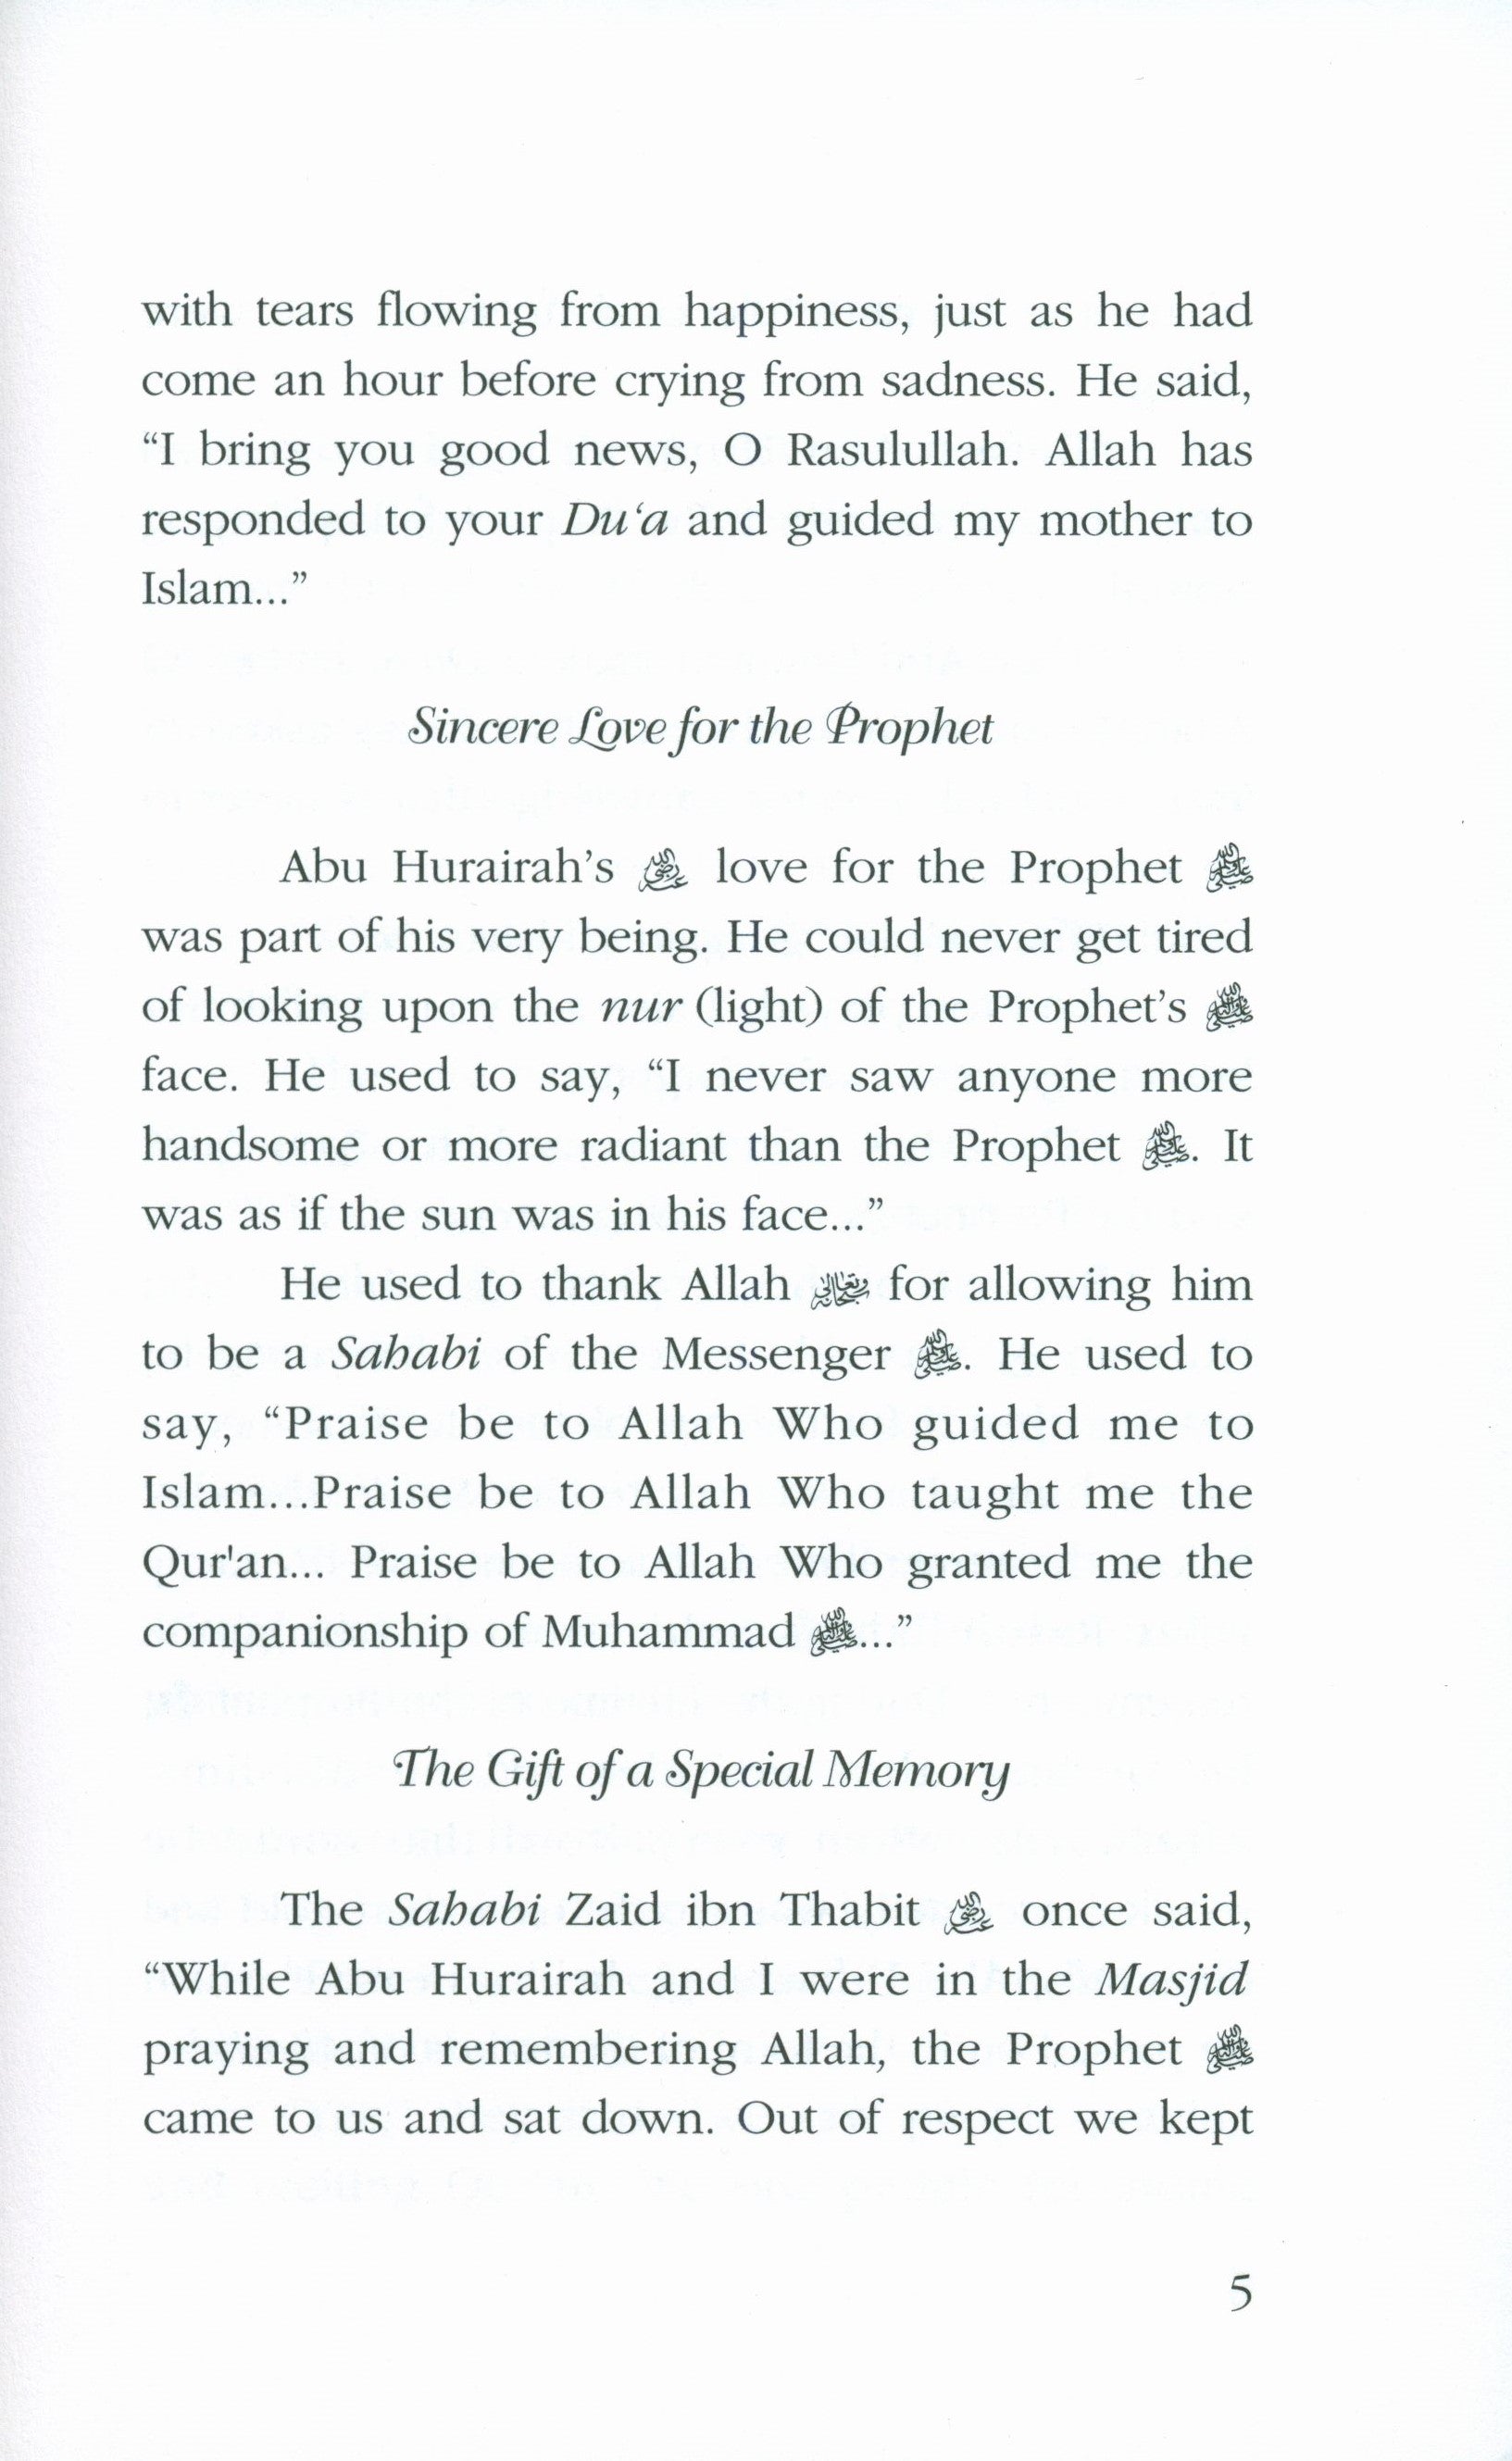 Stories of the Sahabah Volume 4 - Hearts Have Changed